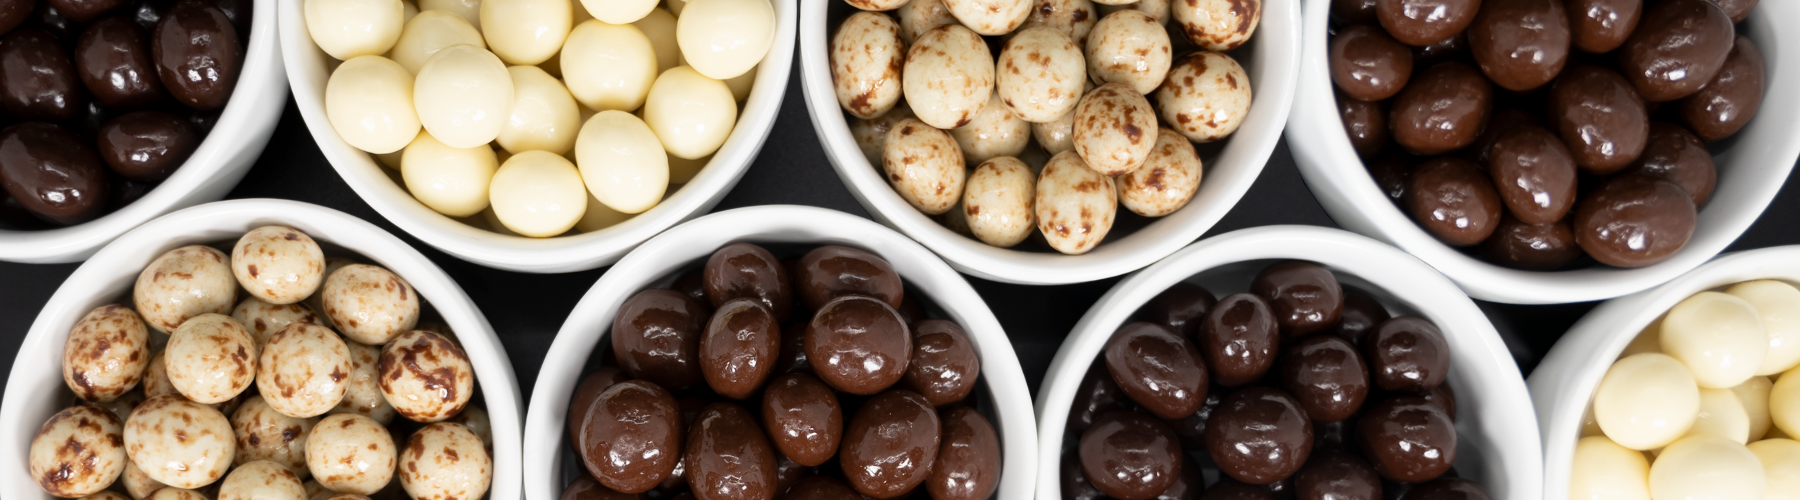 Bowls of White, Marbled, Milk, and Dark Chocolate-Covered Espresso Beans by Dilettante Chocolates